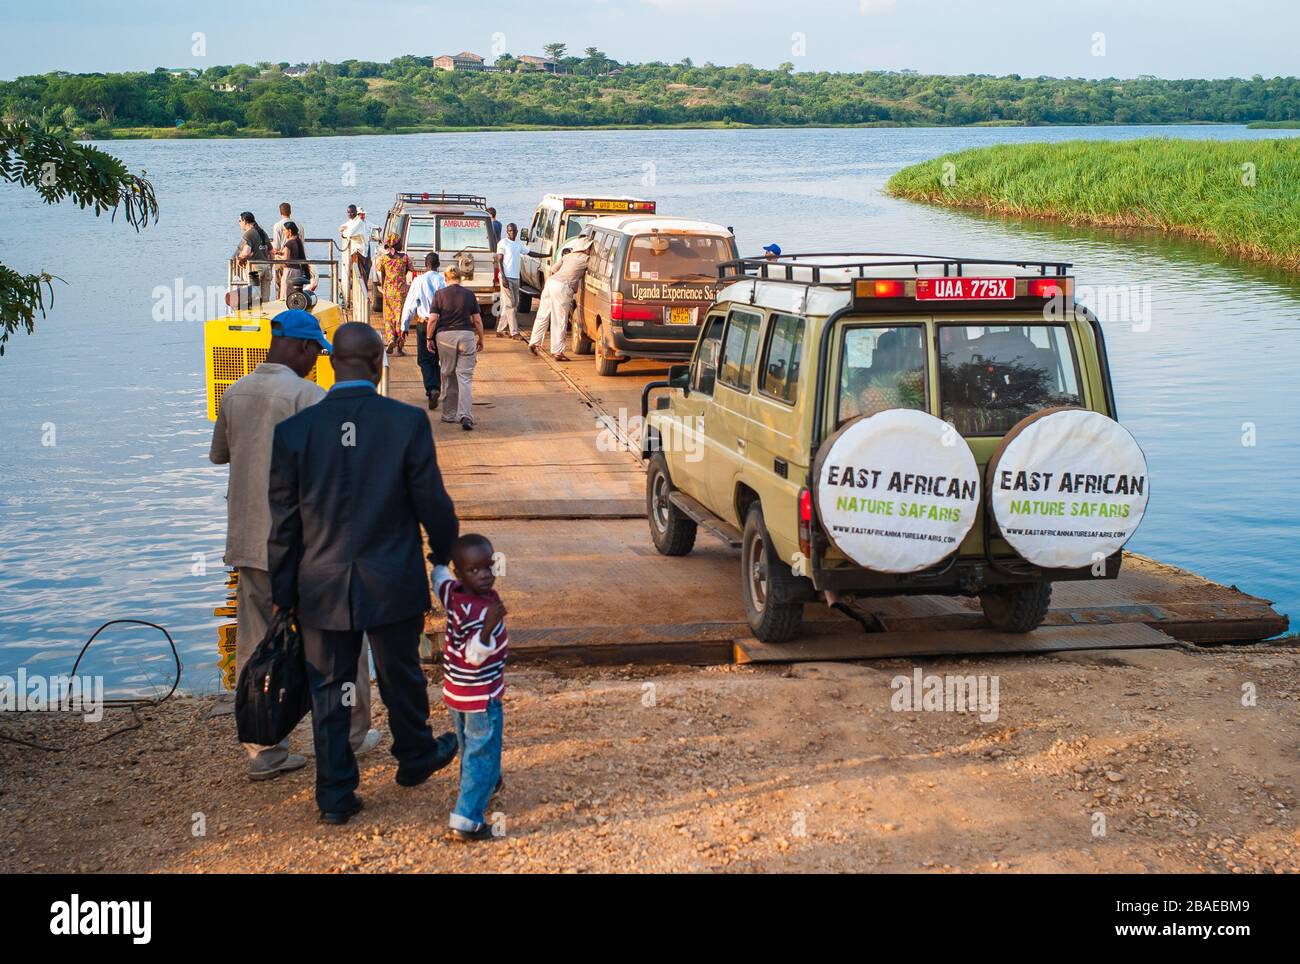 Paraa Ferry Terminal, Uganda - July 17 2011: Paraa or Parra Vehicle Ferry Crossing the Victoria Nile in Murchison Falls National Park, Uganda, Africa. Stock Photo